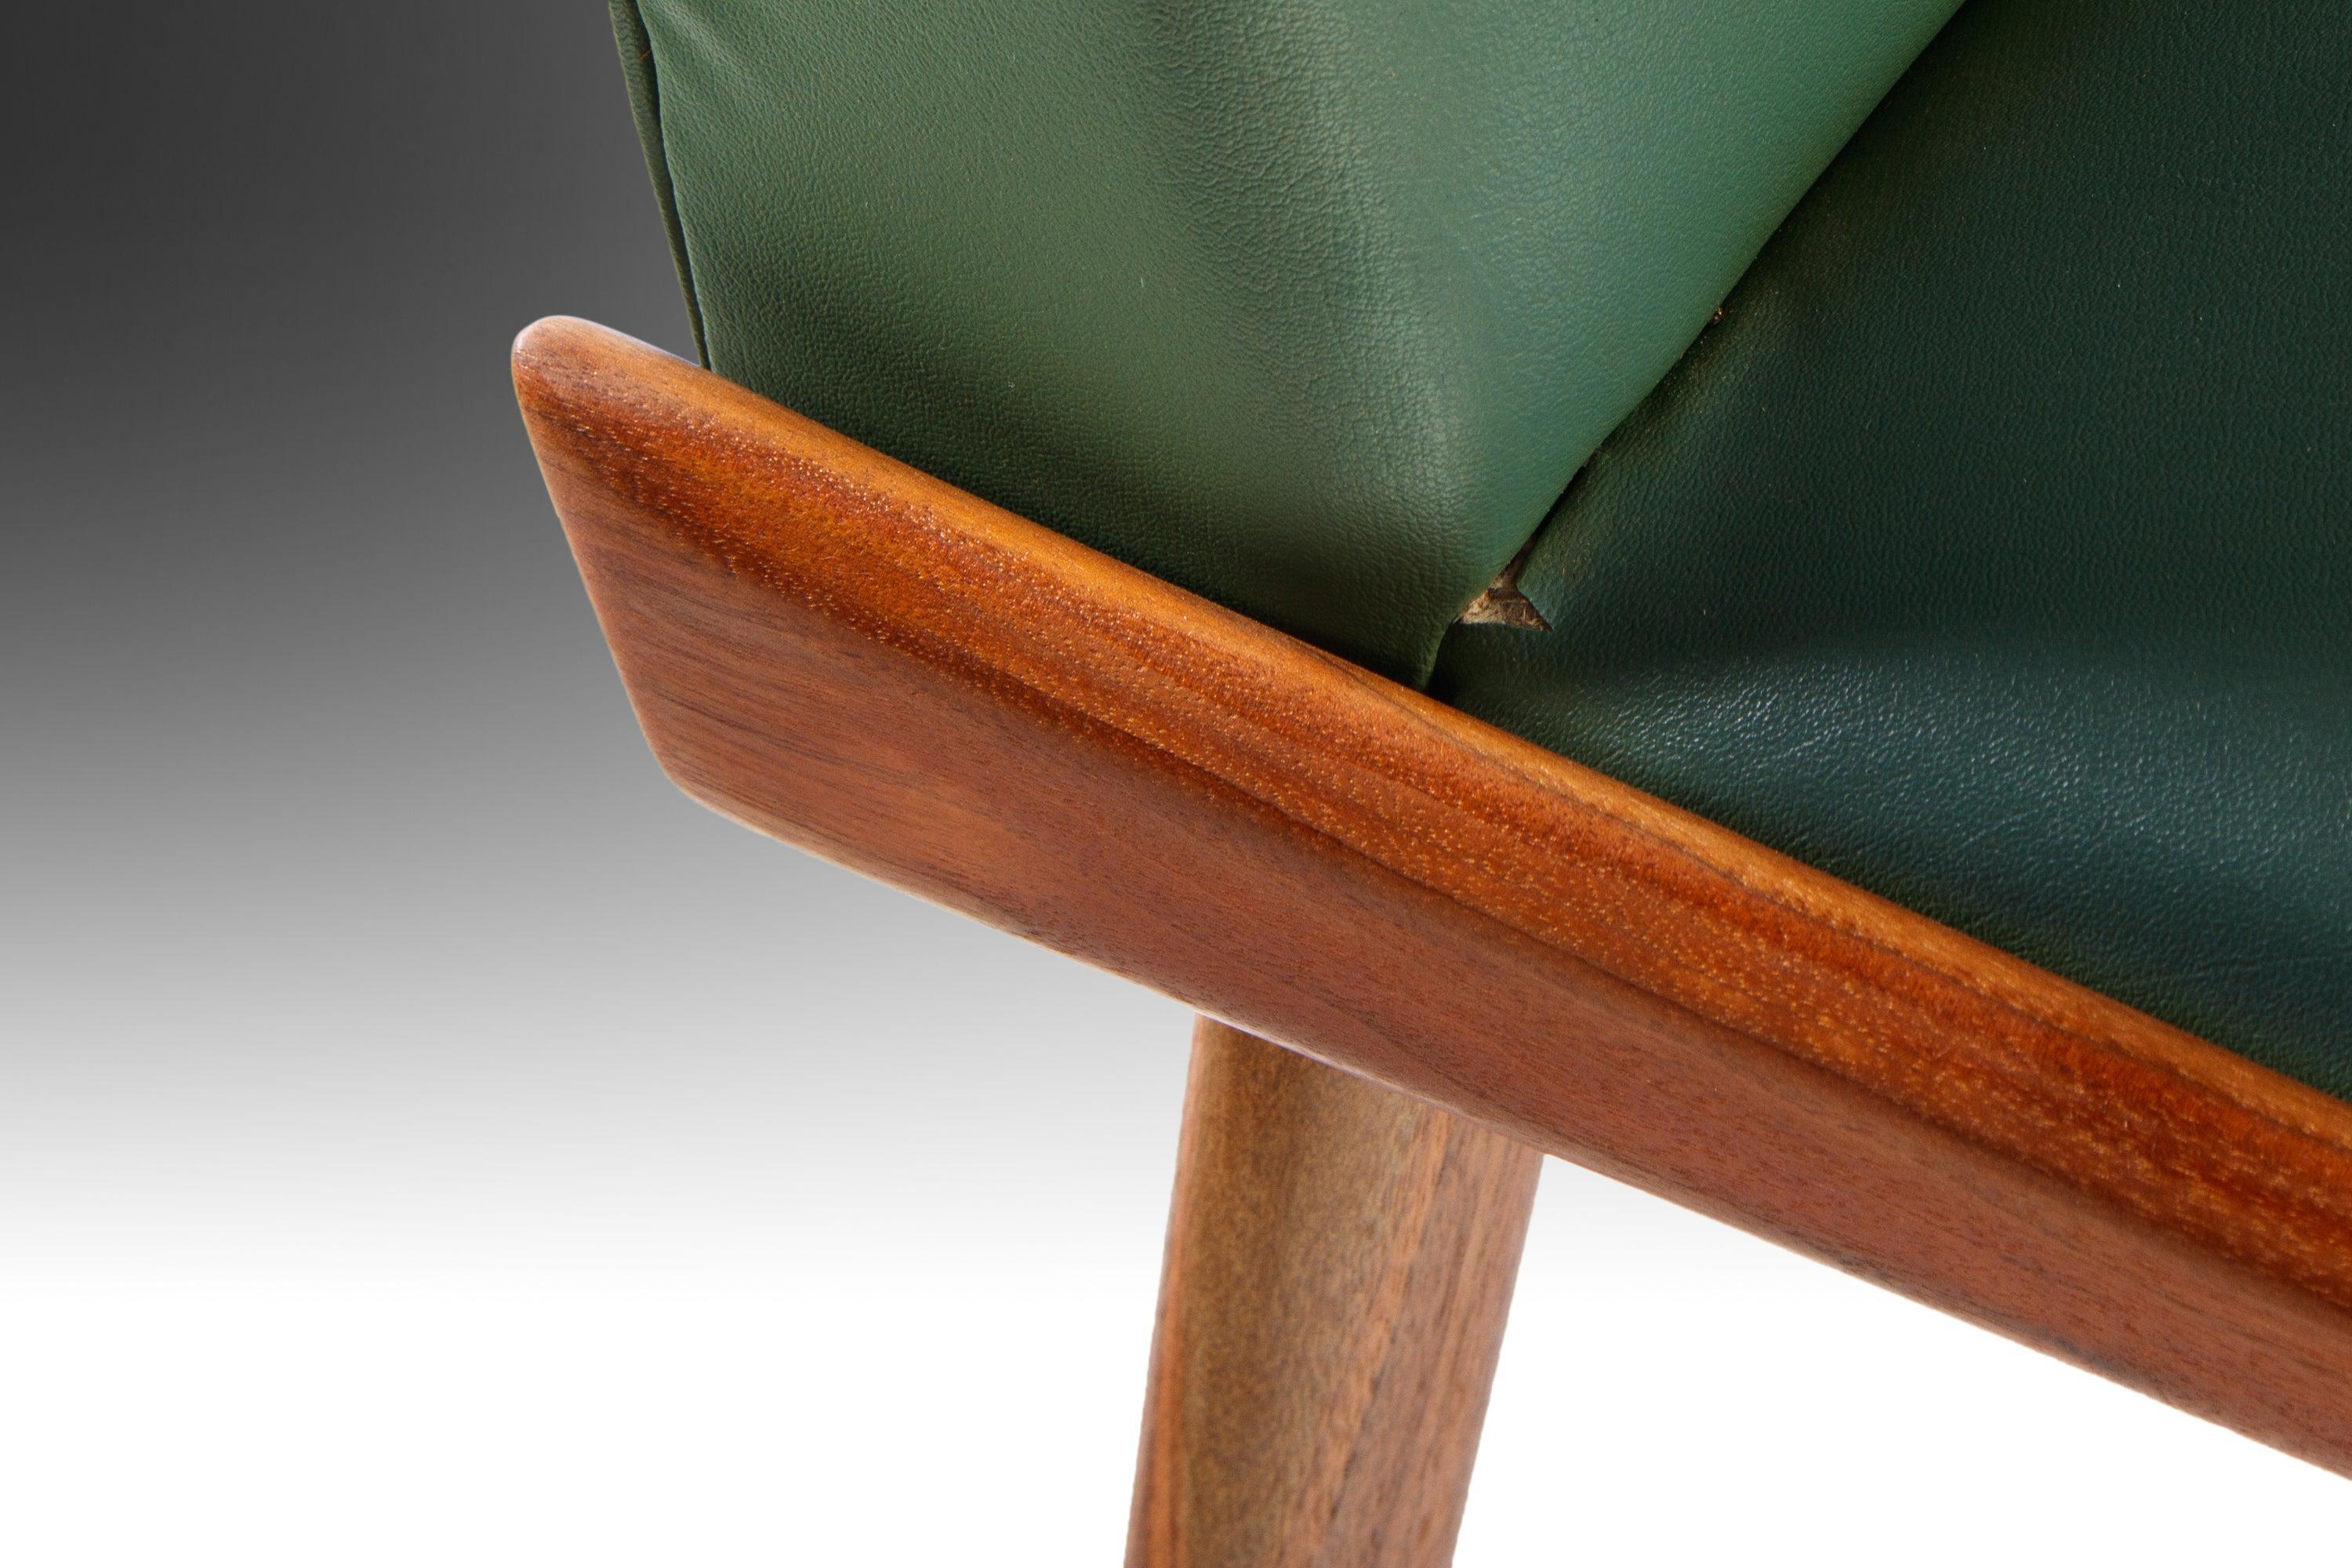 MCM Slipper Chair in Walnut & Original Green Fabric by Kroehler, USA, c. 1960's For Sale 3